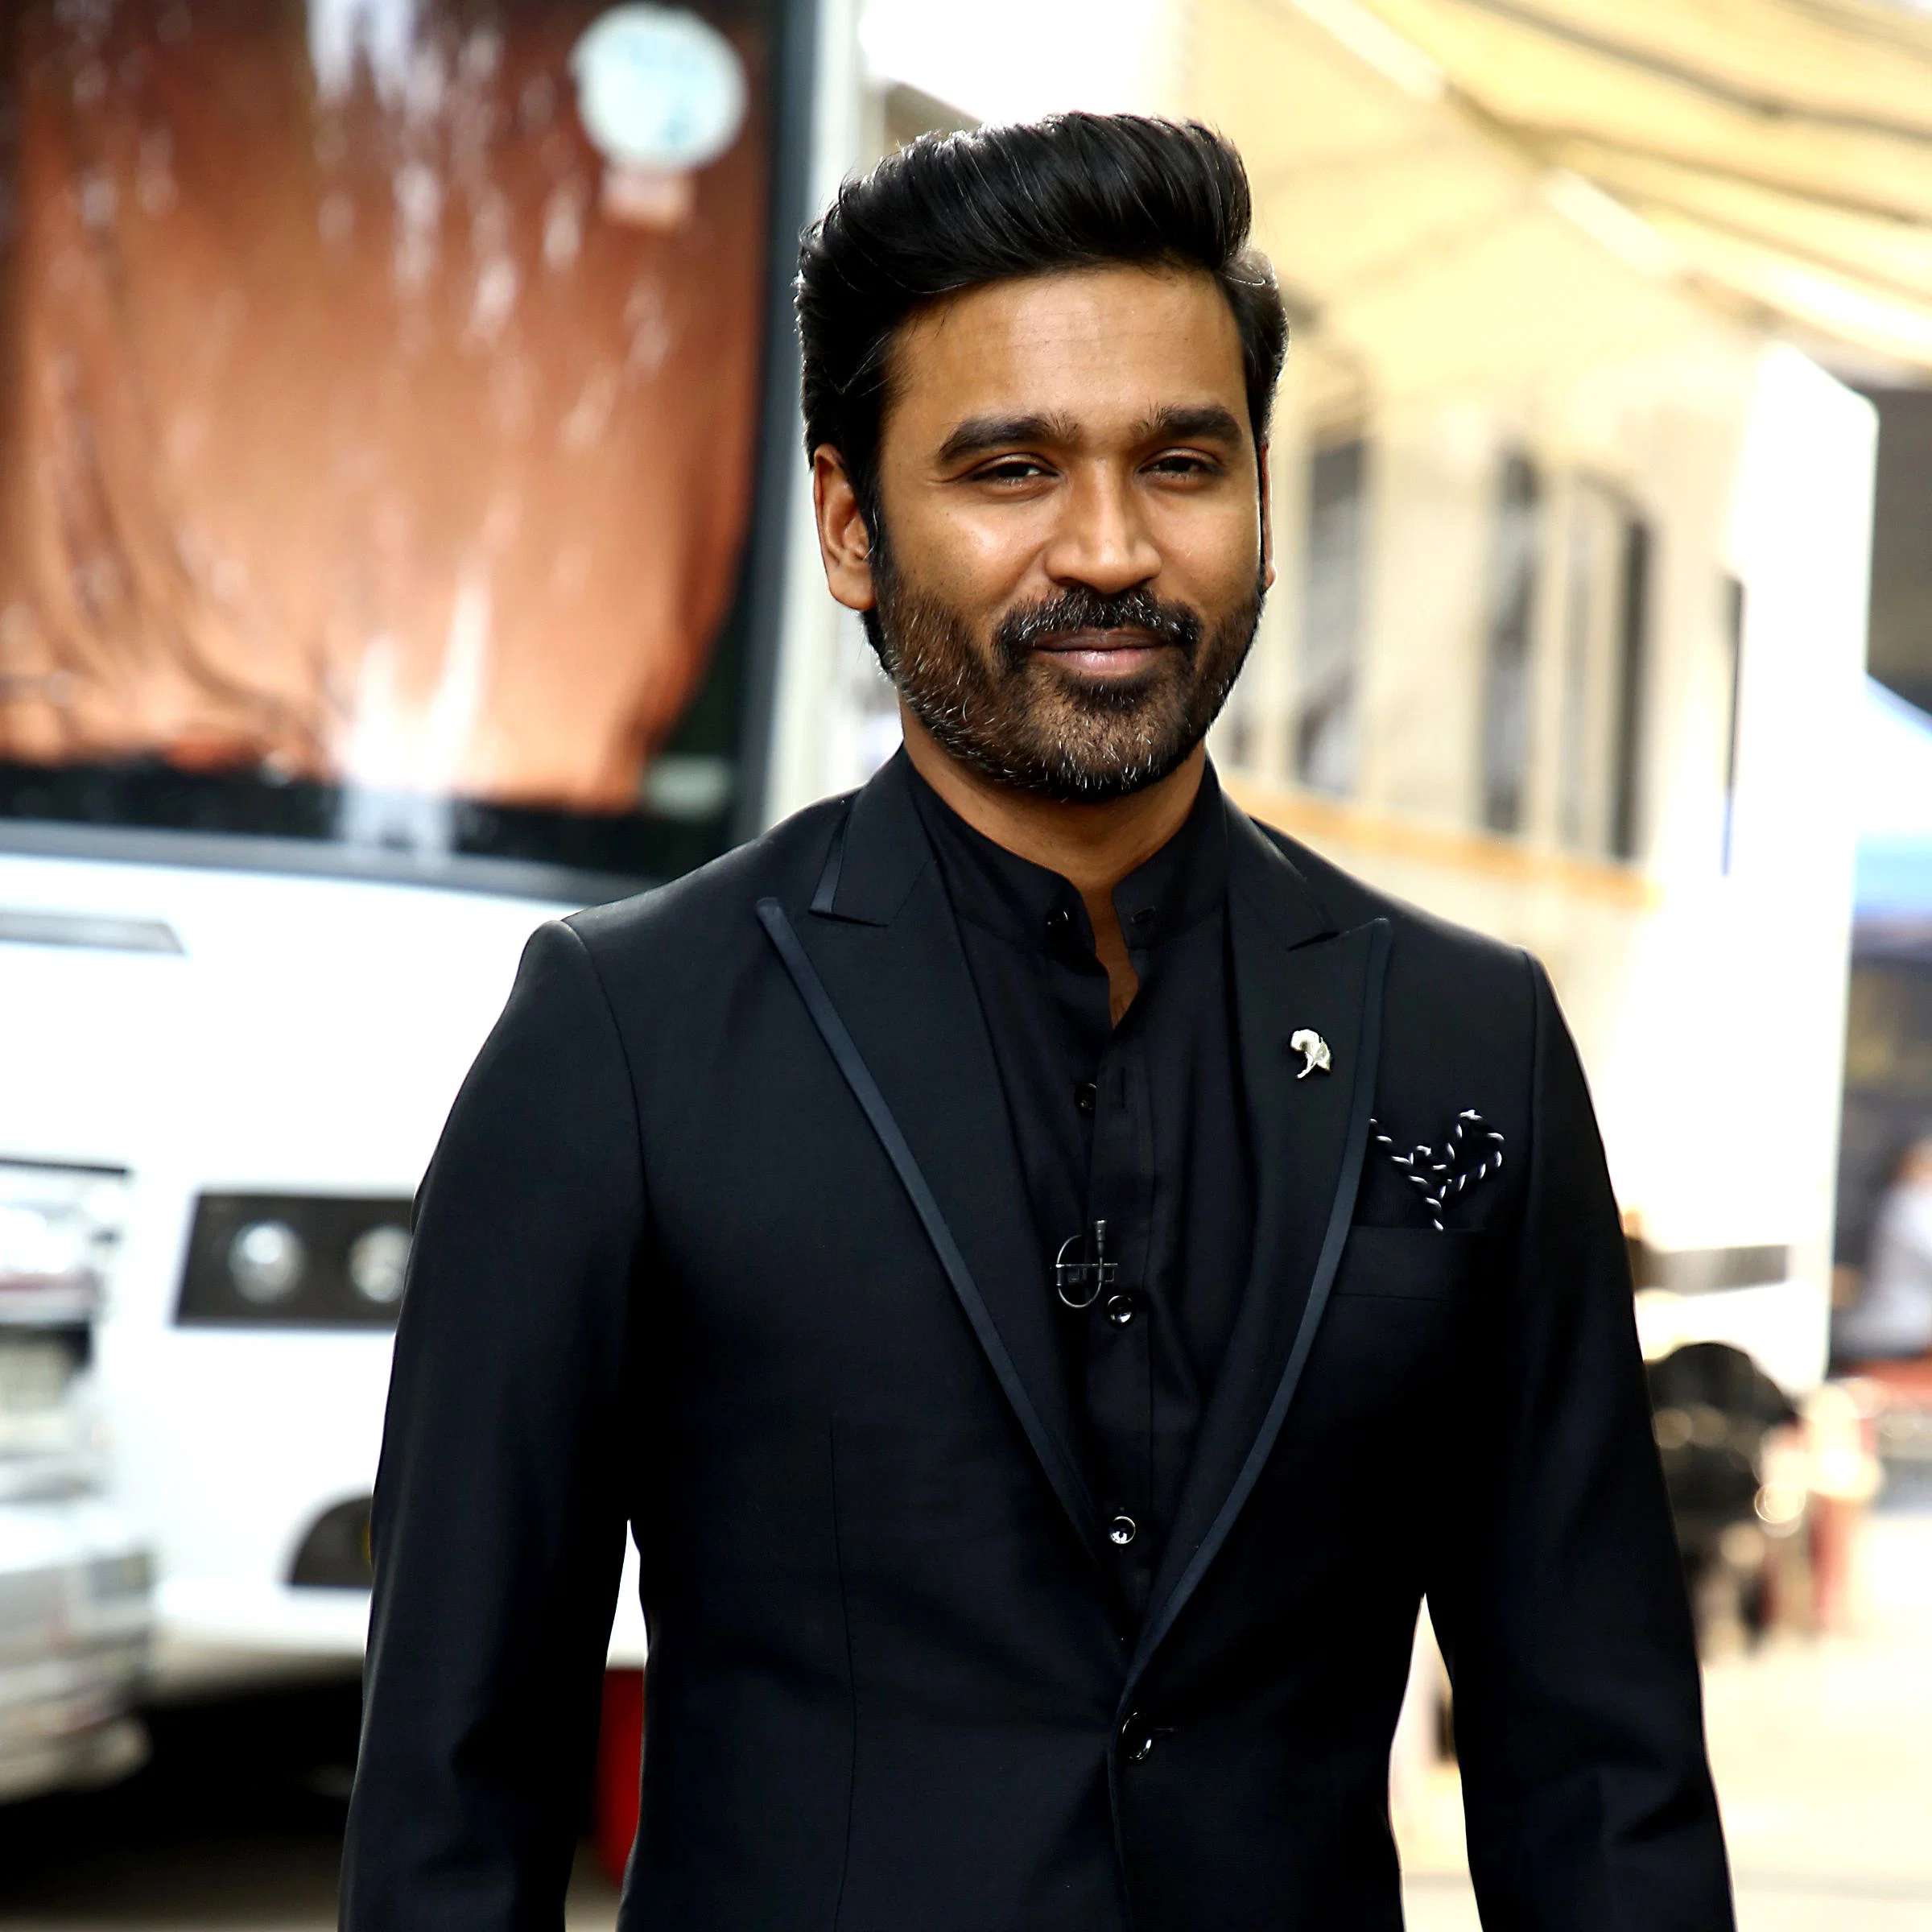 Dhanush fun moment in the gray man movie promotion video getting viral on social media